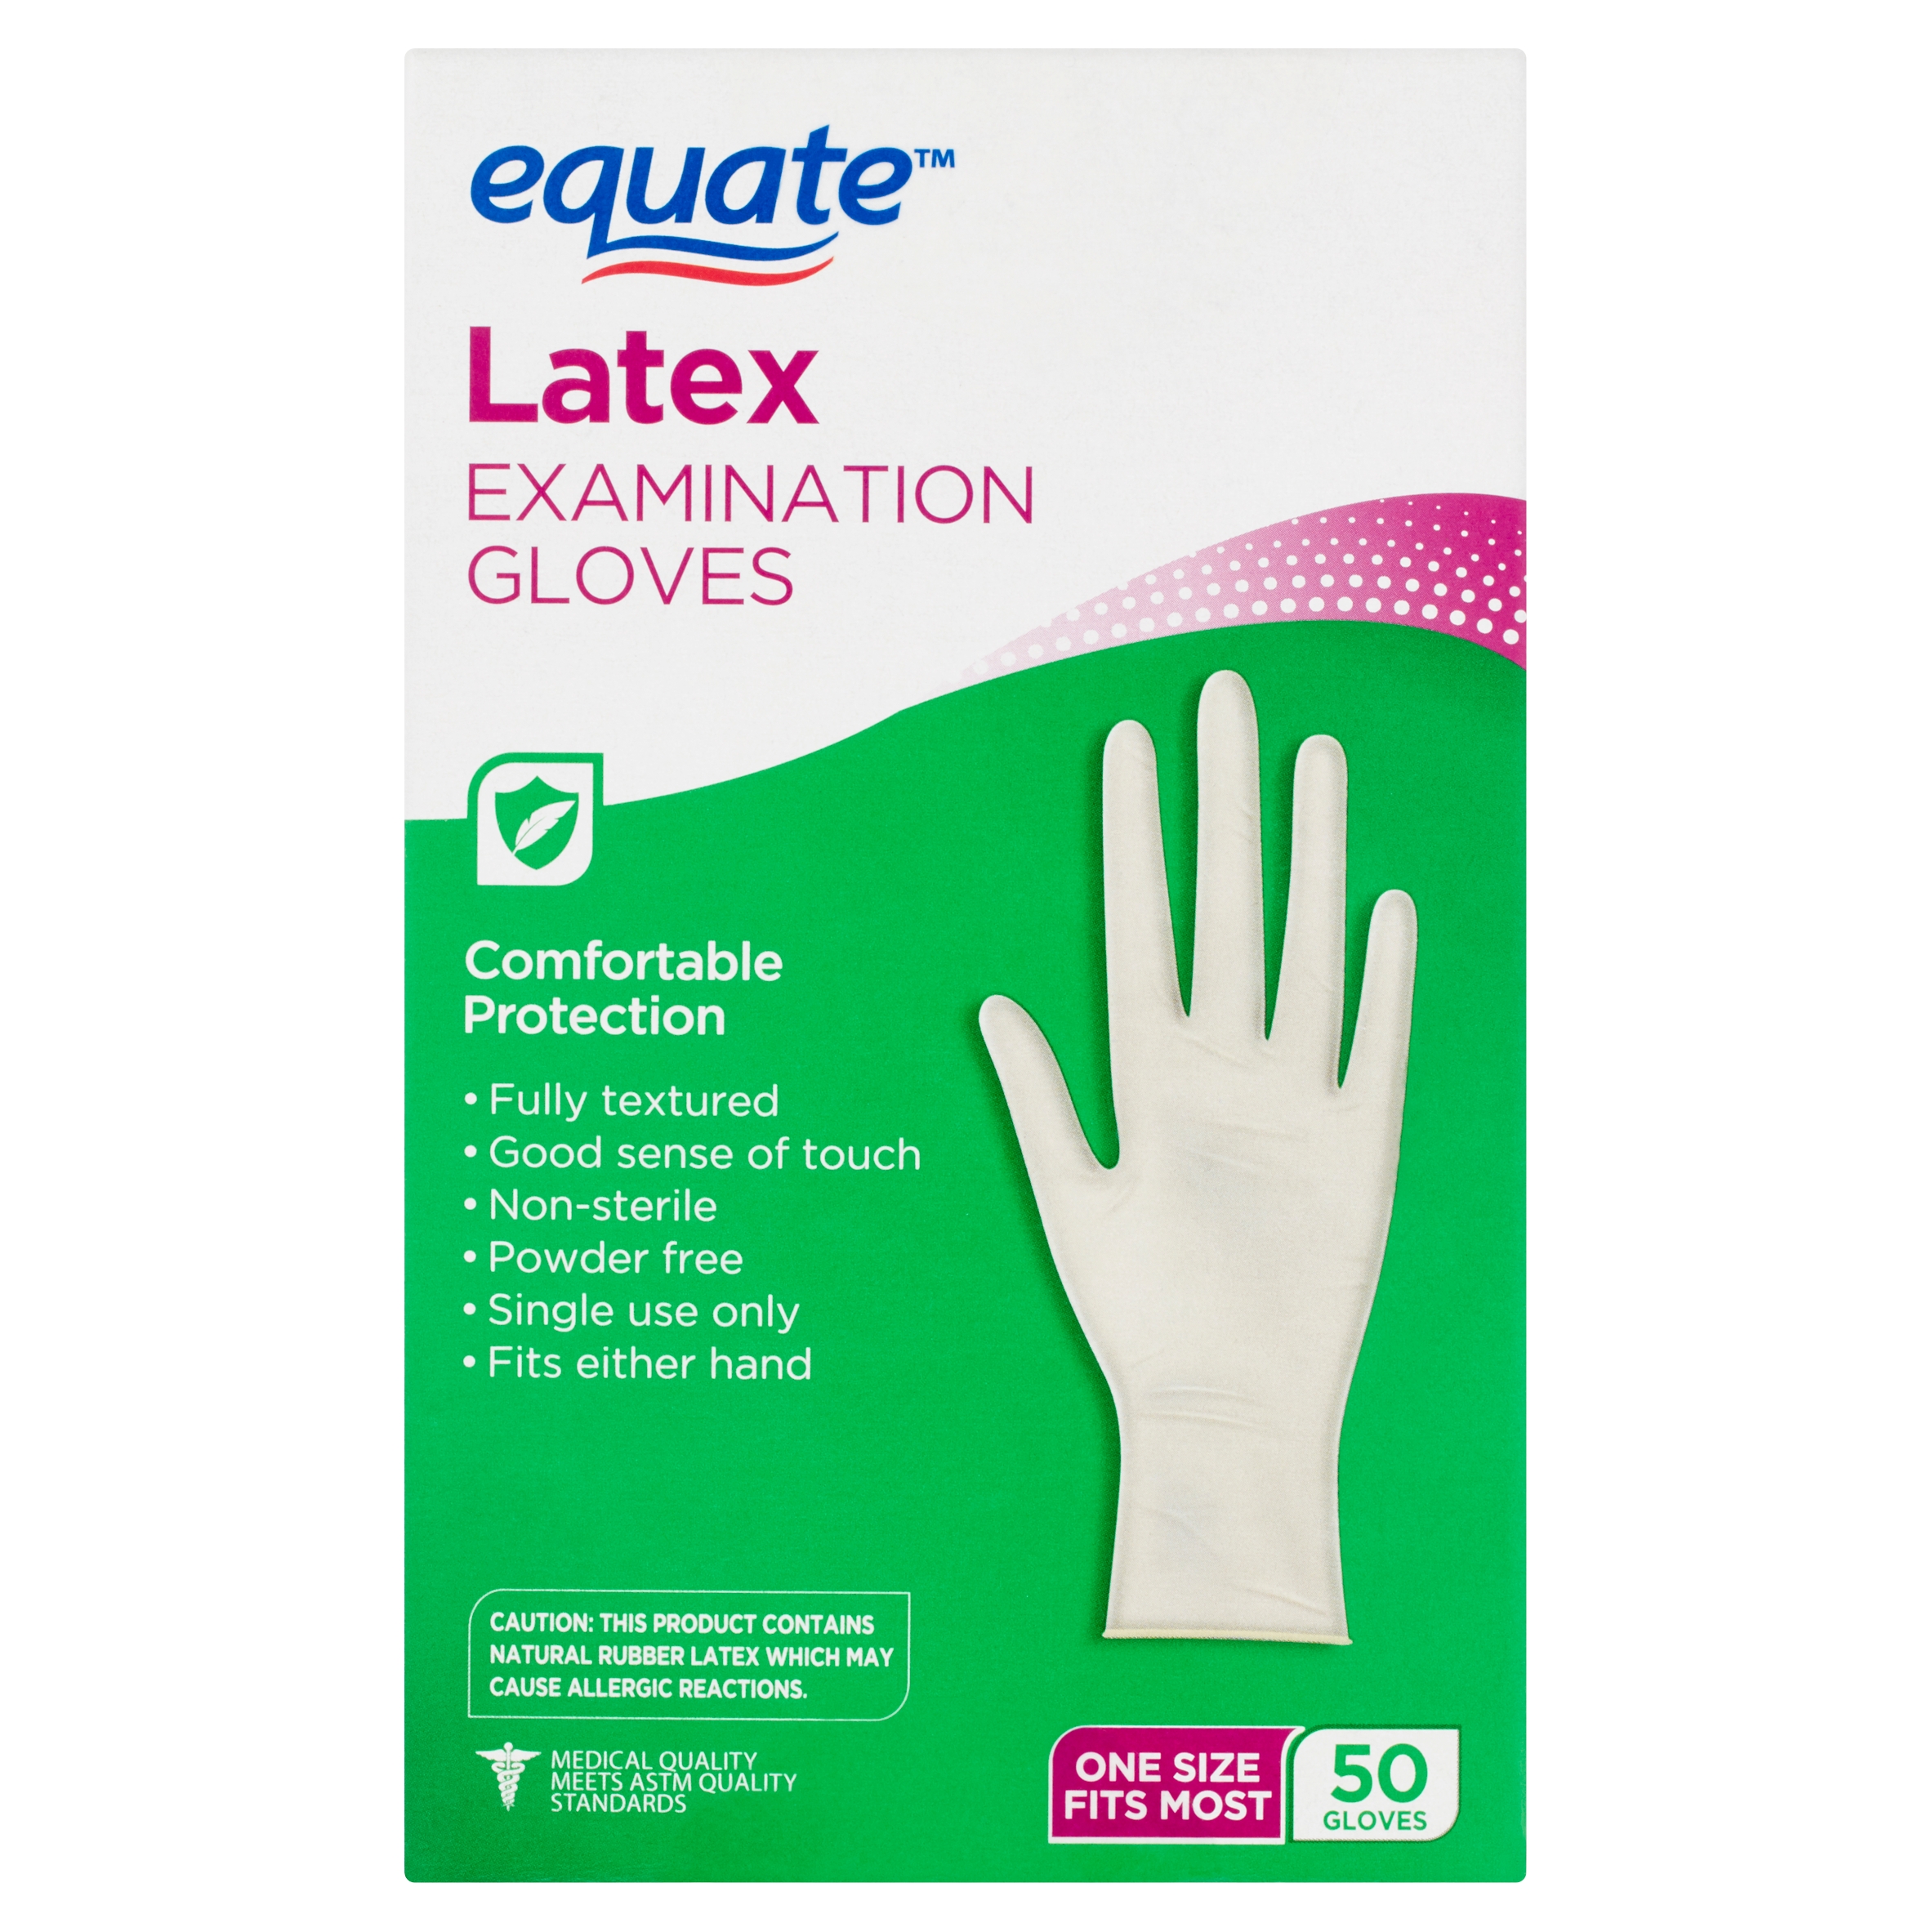 Equate Latex Examination Gloves, 50 Count - image 3 of 10